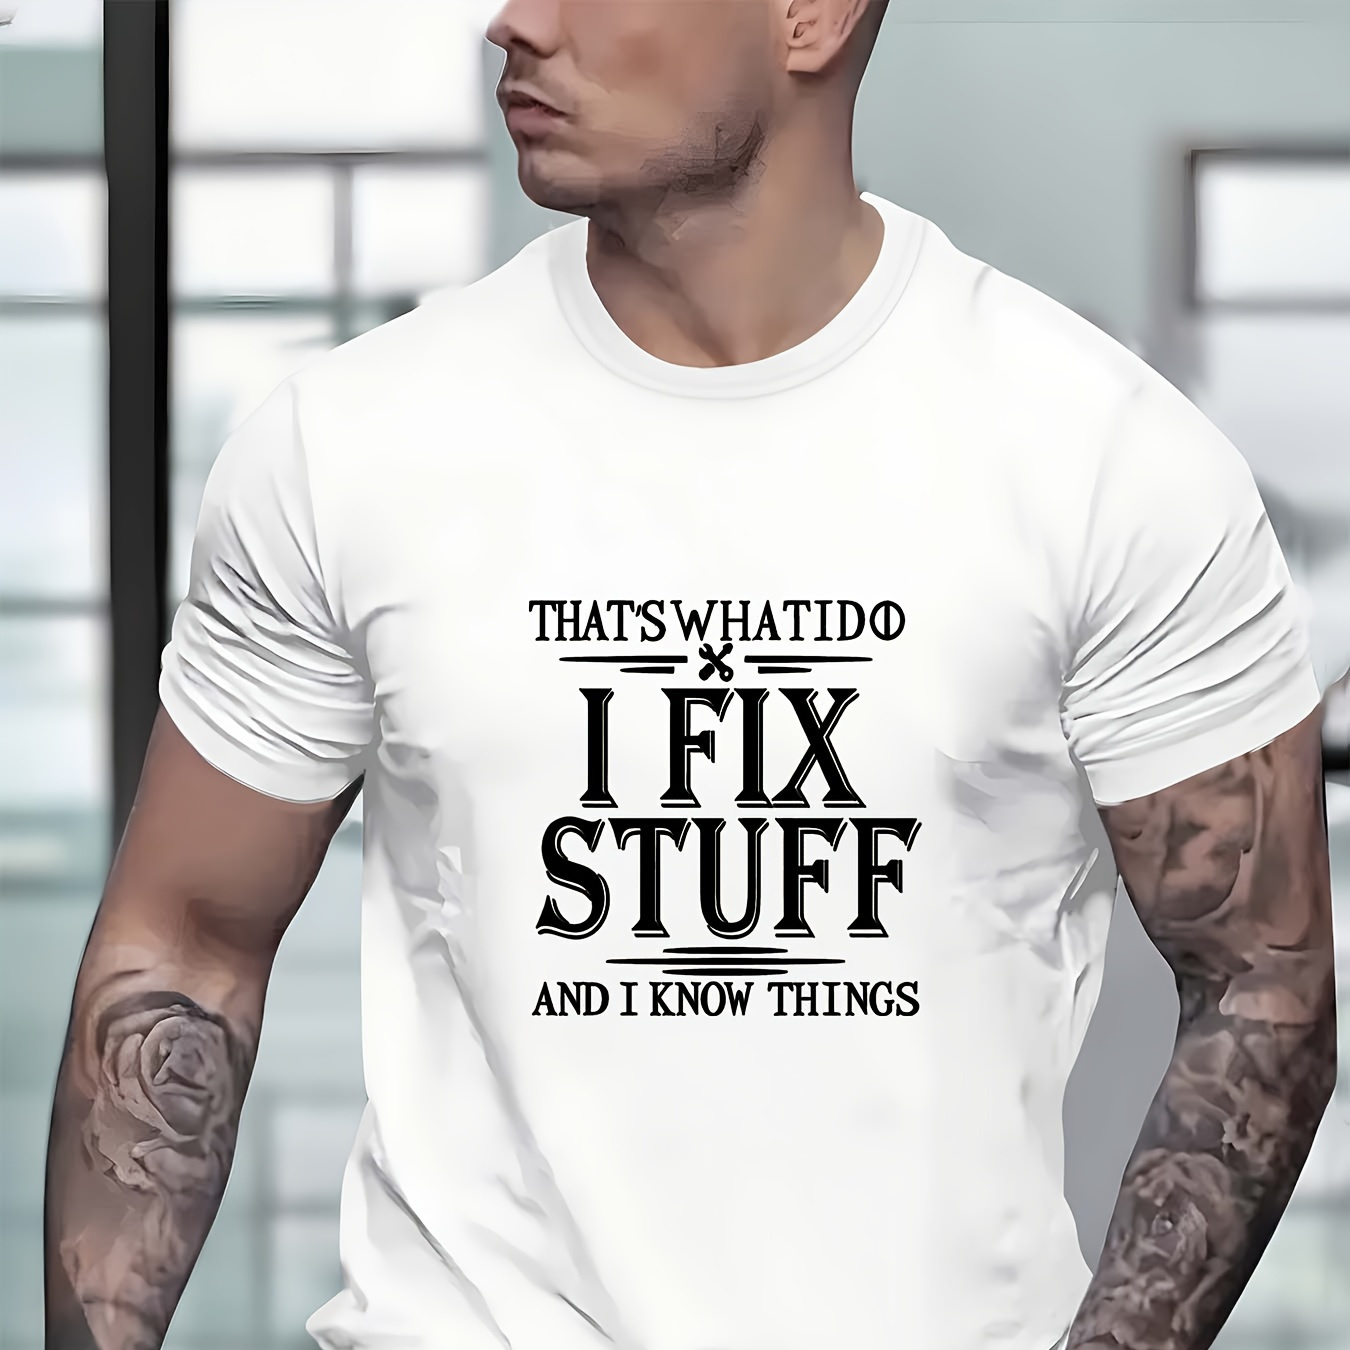 

1 Pc, 100% Cotton T-shirt, I Fix Stuff Print Men's Crew Neck Fashionable Short Sleeve Sports T-shirt, Comfortable And Versatile, For Summer And Spring, Athletic Style, Comfort Fit T-shirt, As Gifts